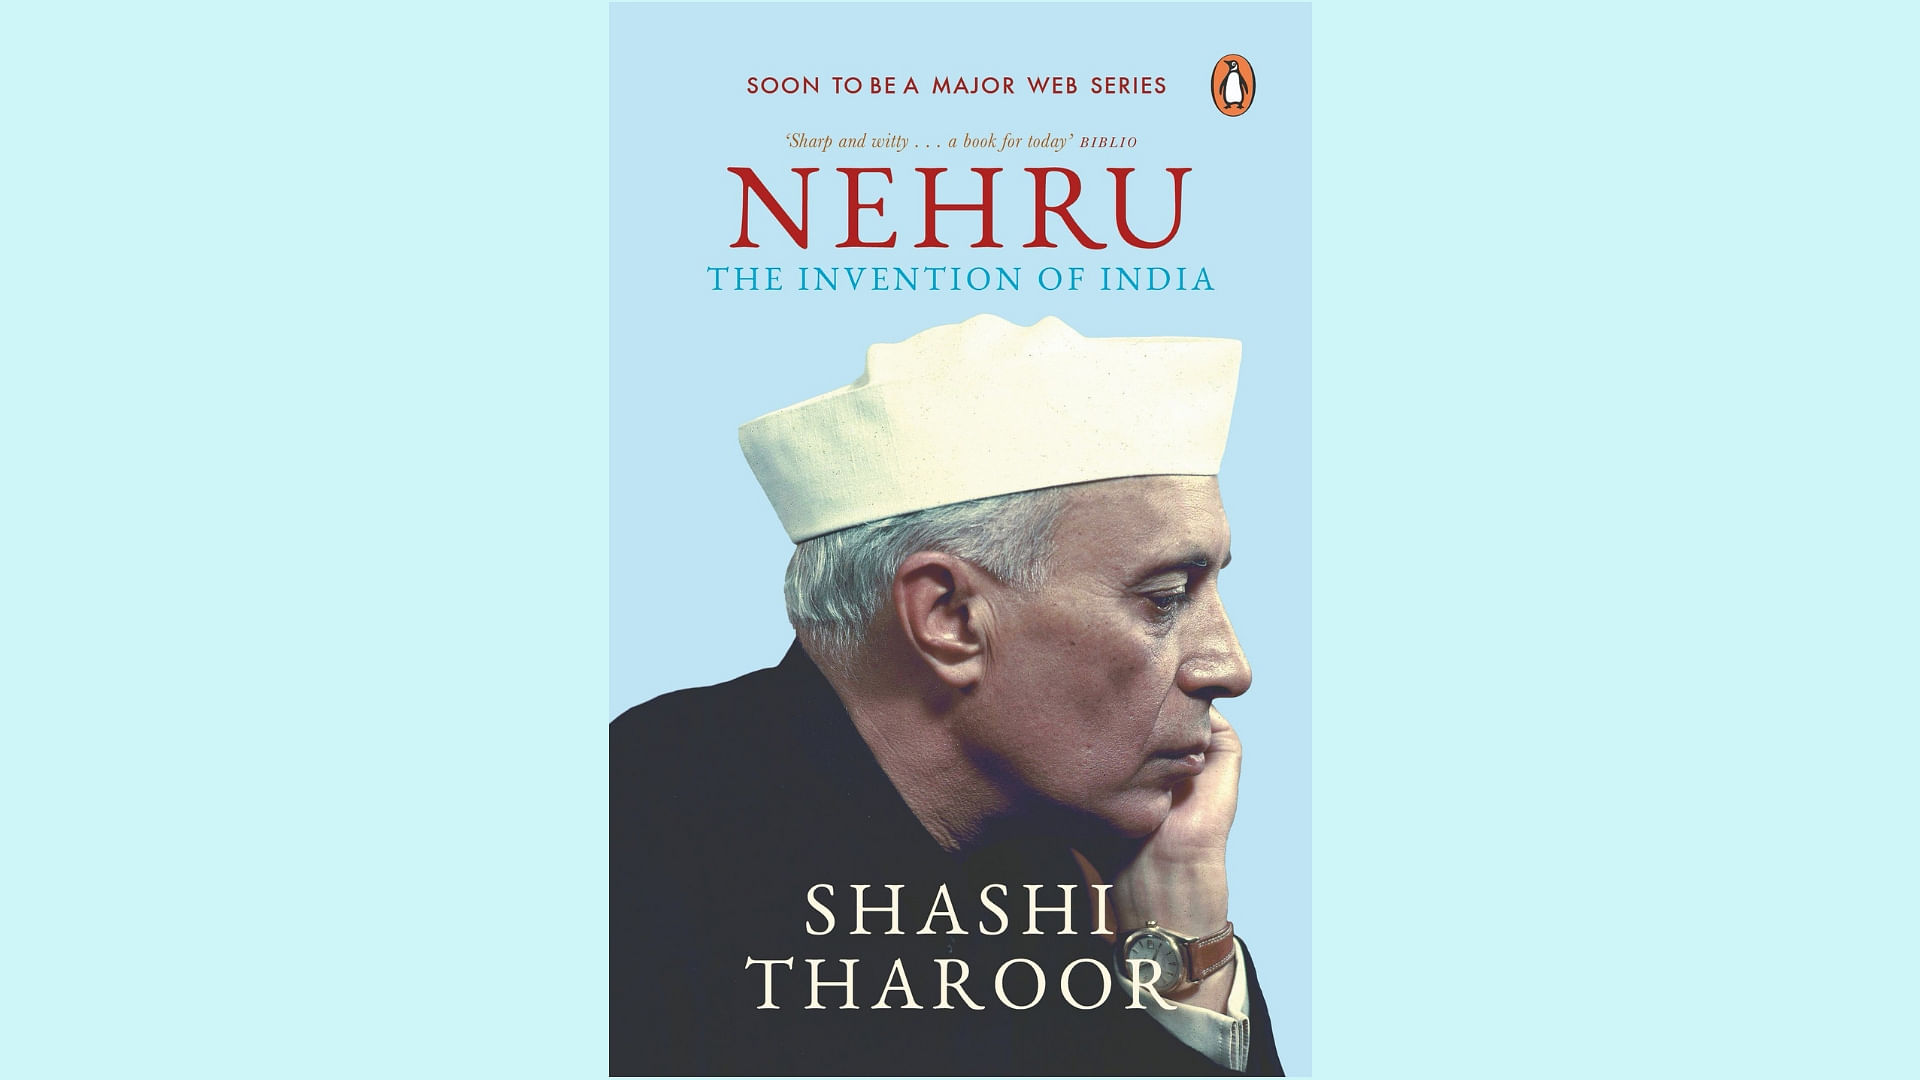 Shashi Tharoor’s book&nbsp;<i>Nehru: The Invention of India</i> will be made into a web series.